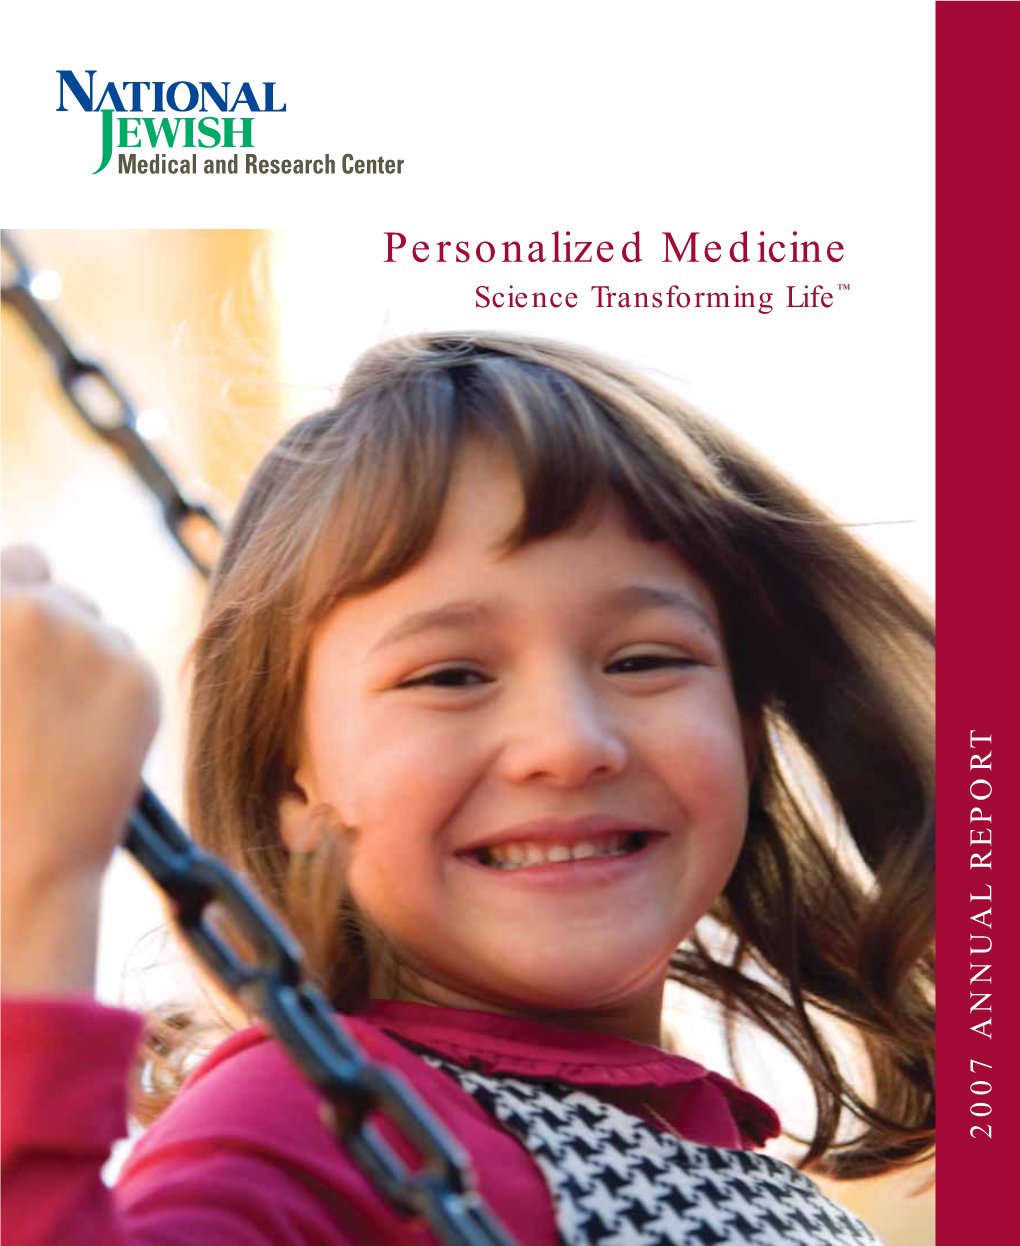 Personalized Medicine Science Transforming Life™ 2007 ANNUAL REPORT an Exciting New Chapter Begins with a Terrific Year